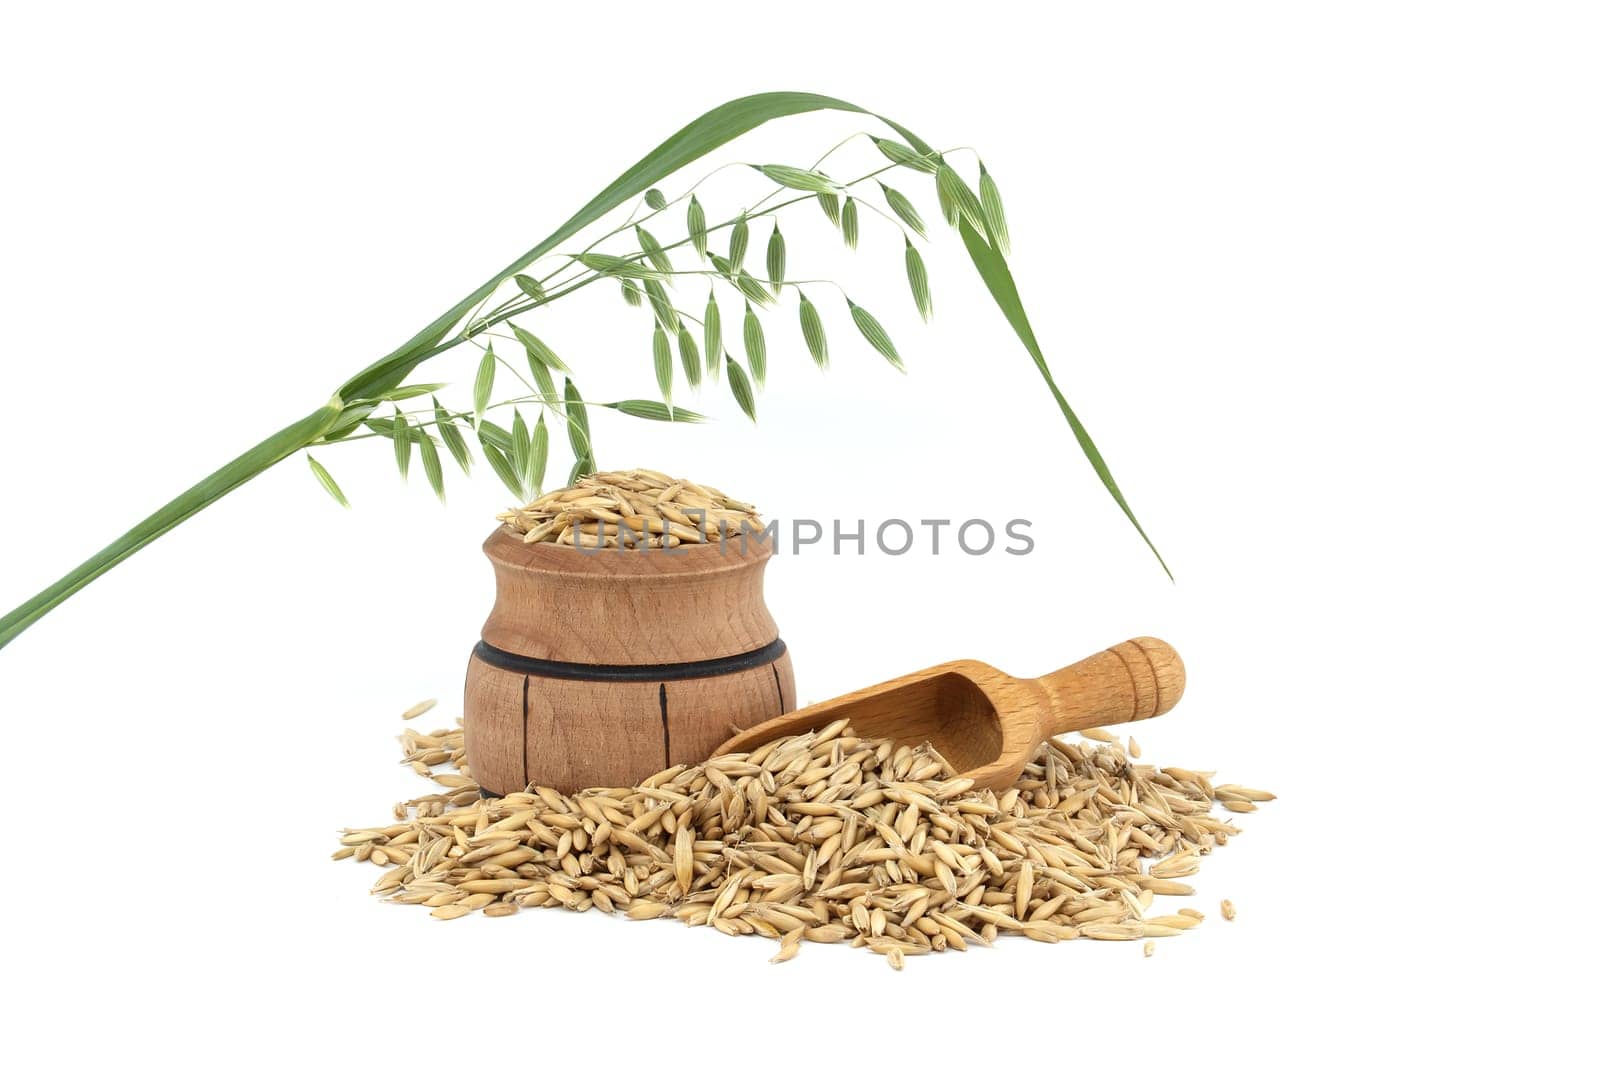 Whole oat grain seeds with hulls or husks isolated on a white background. Agriculture, diet and nutrition